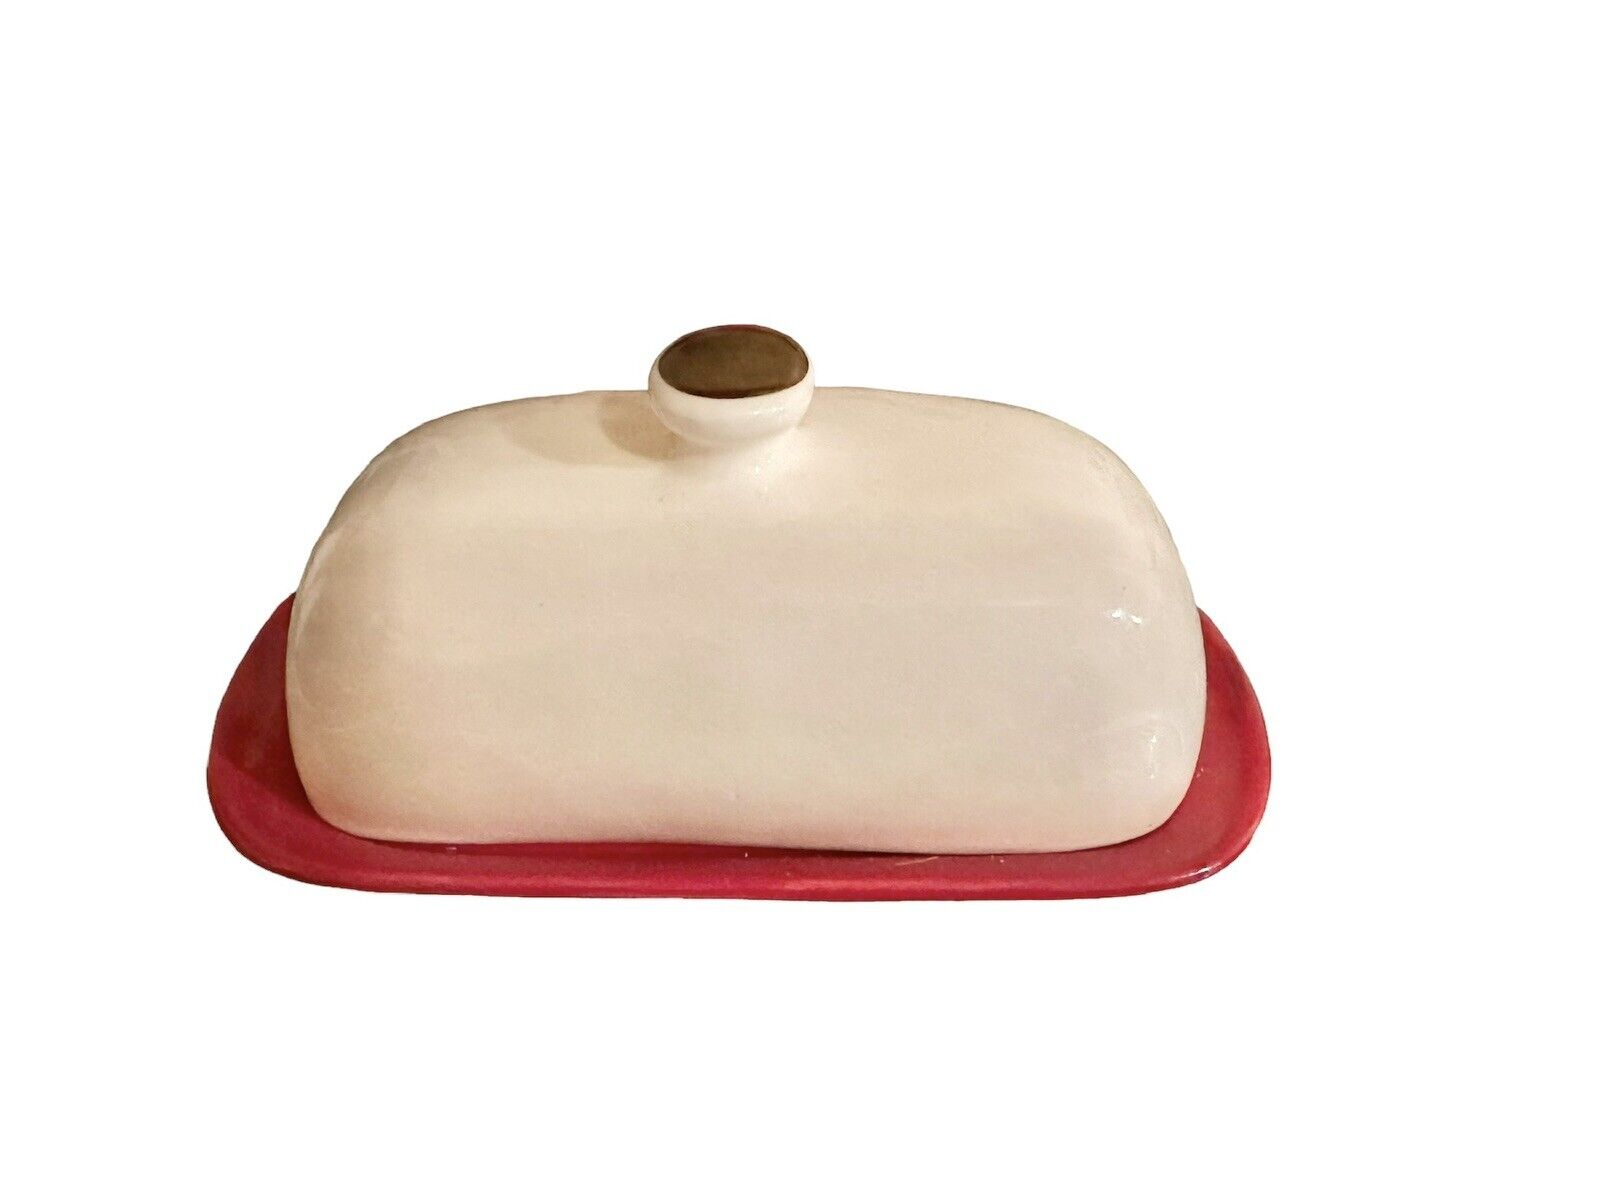 Winter Wonder Lane Holiday Cozy Covered Butter Dish Red White Ceramic Christmas